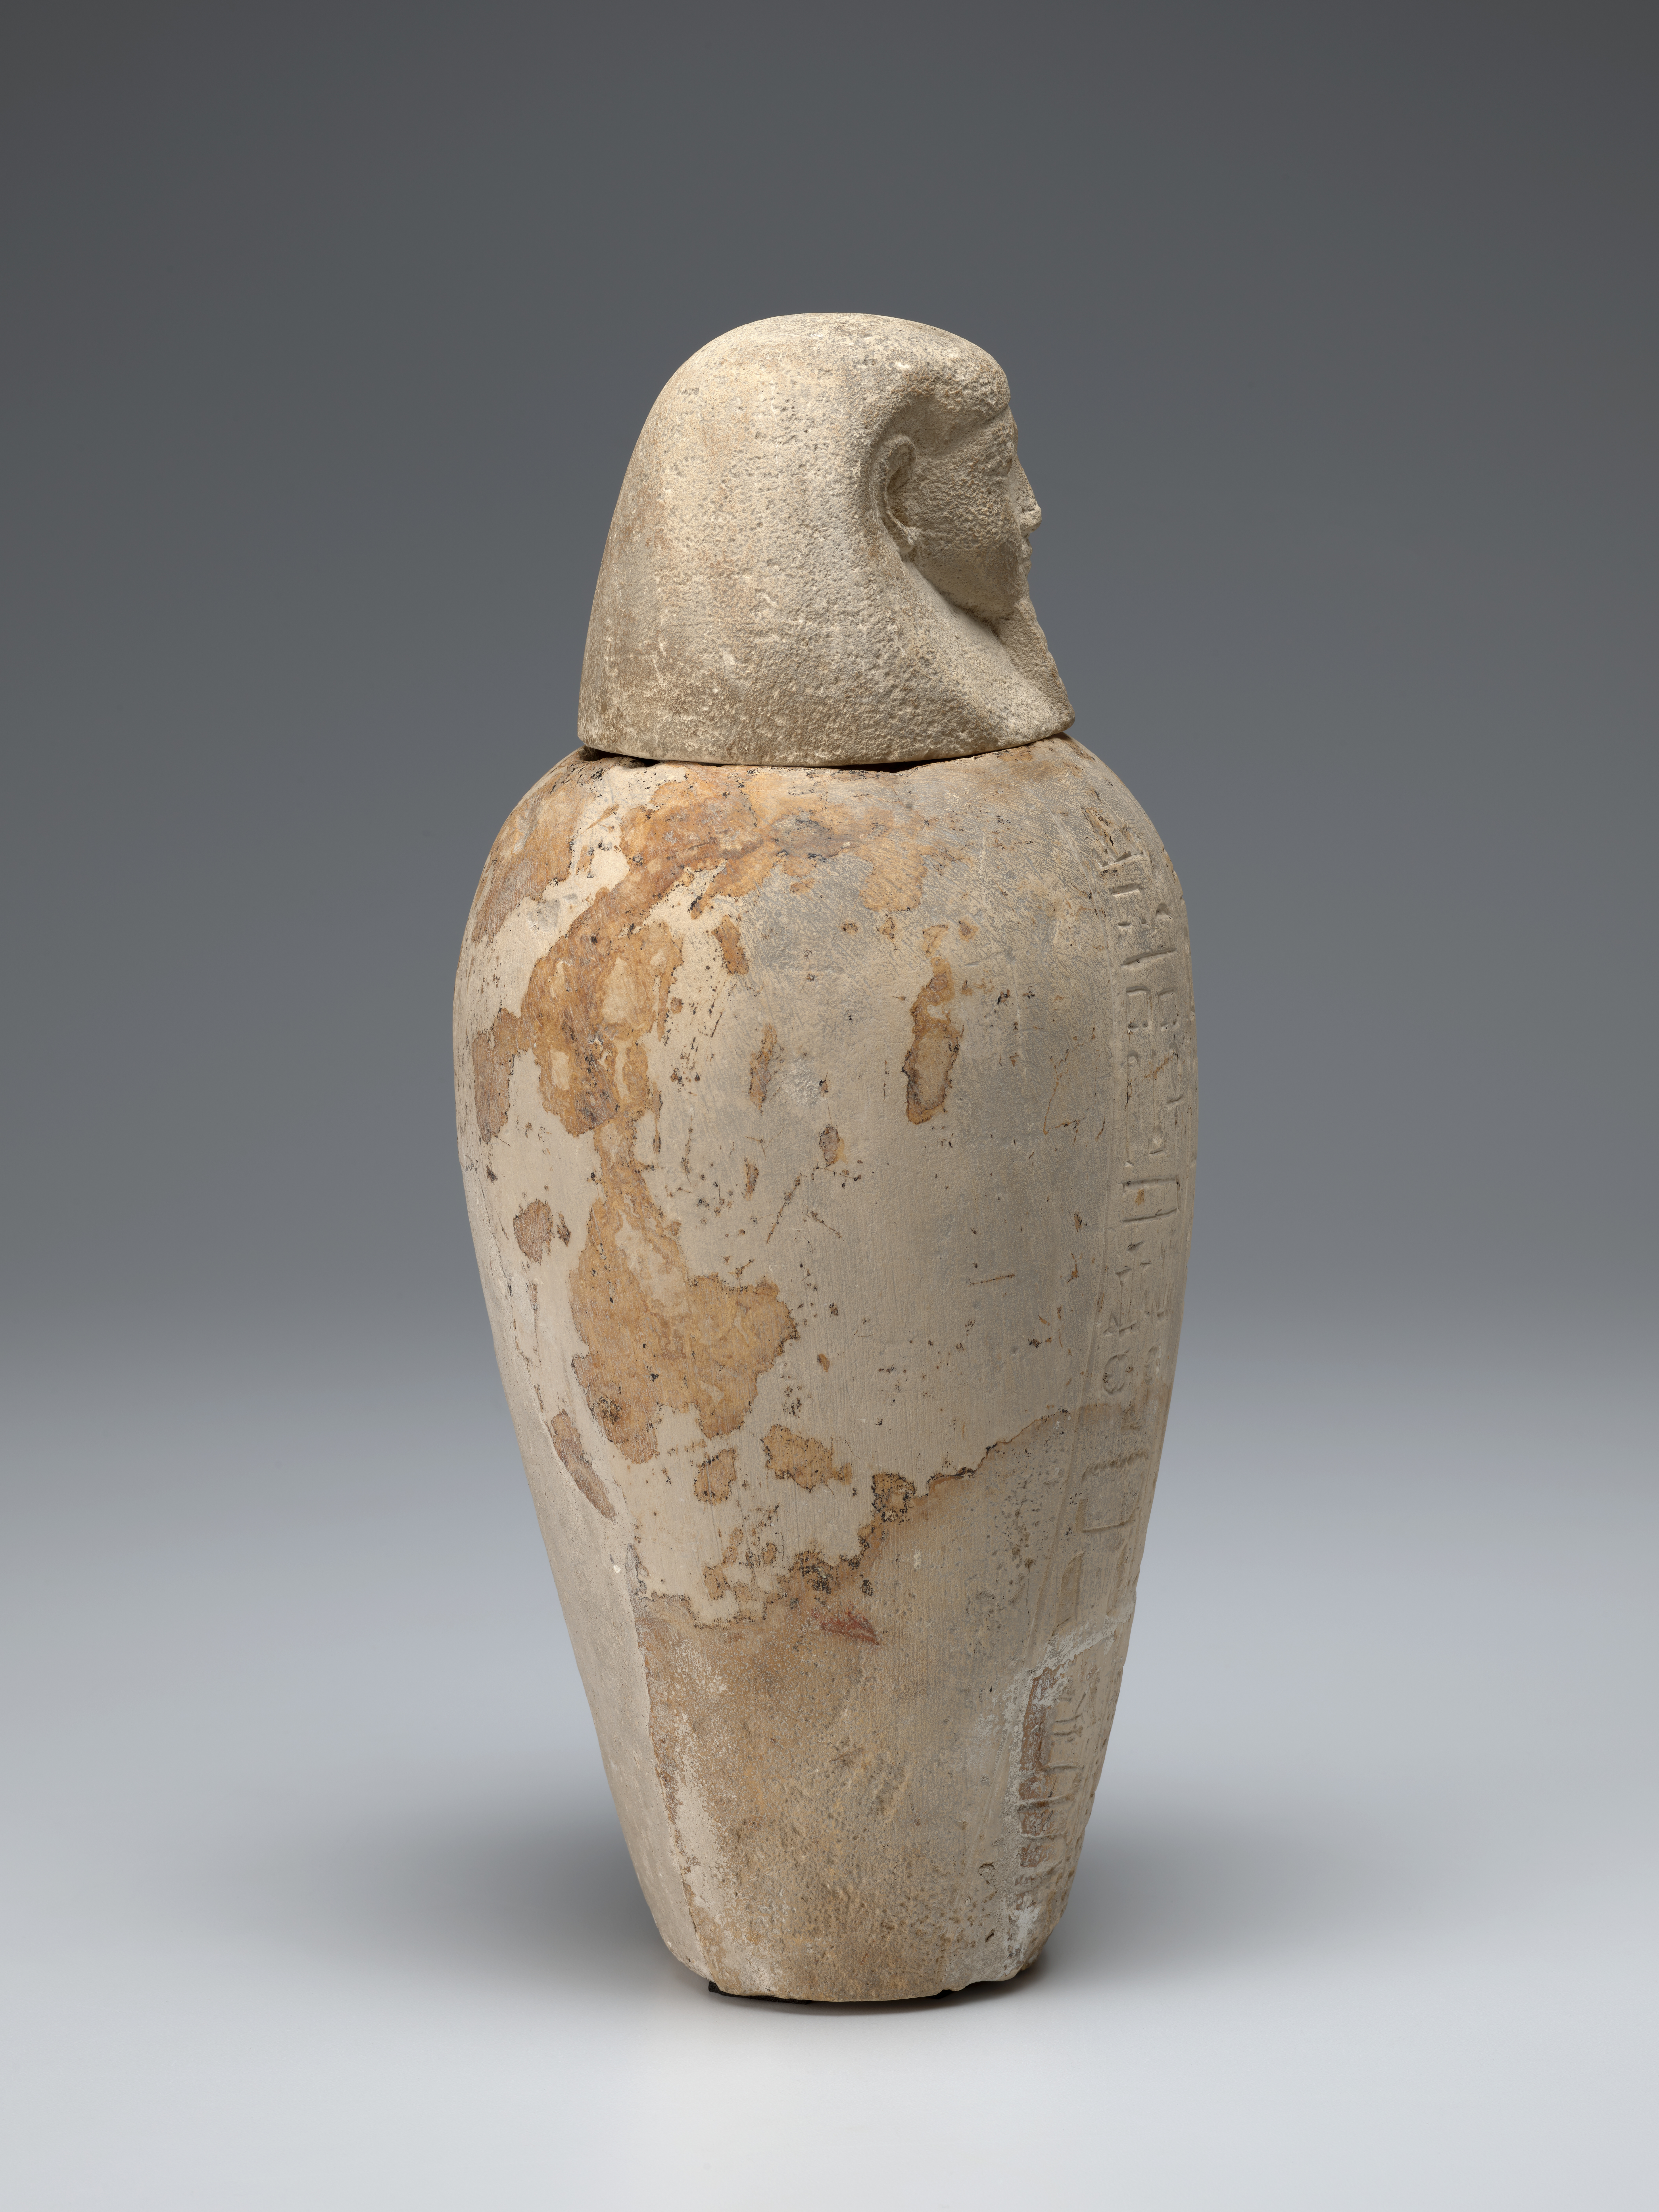 A stone jar with hieroglyphic carvings and a lid with a human face.